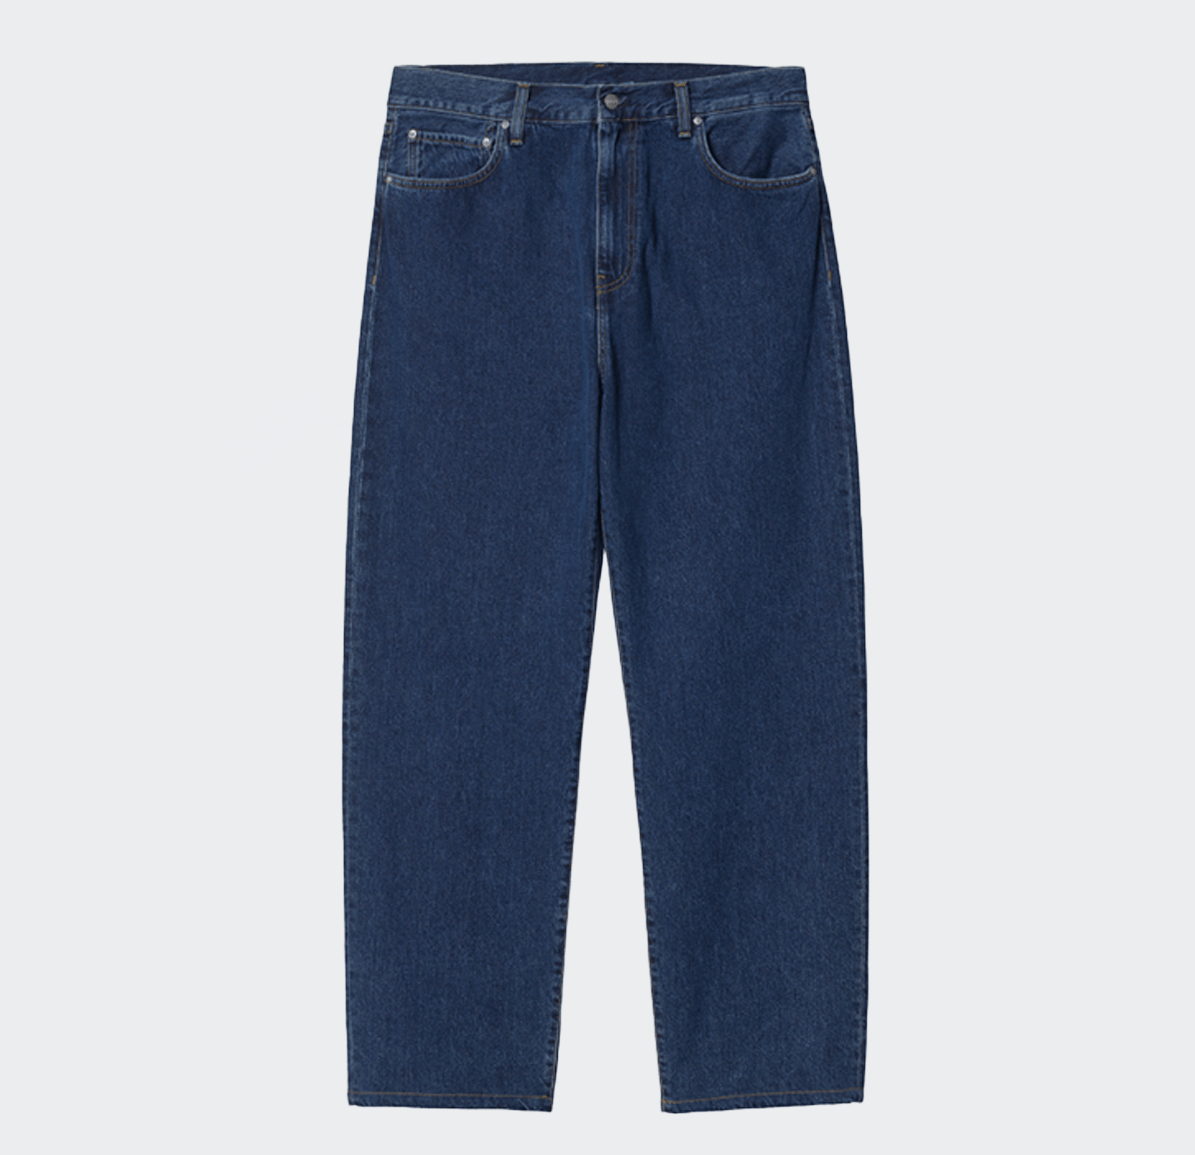 Carhartt WIP Landon Pant - Blue Stone Washed - Carhartt WIP - State Of Play